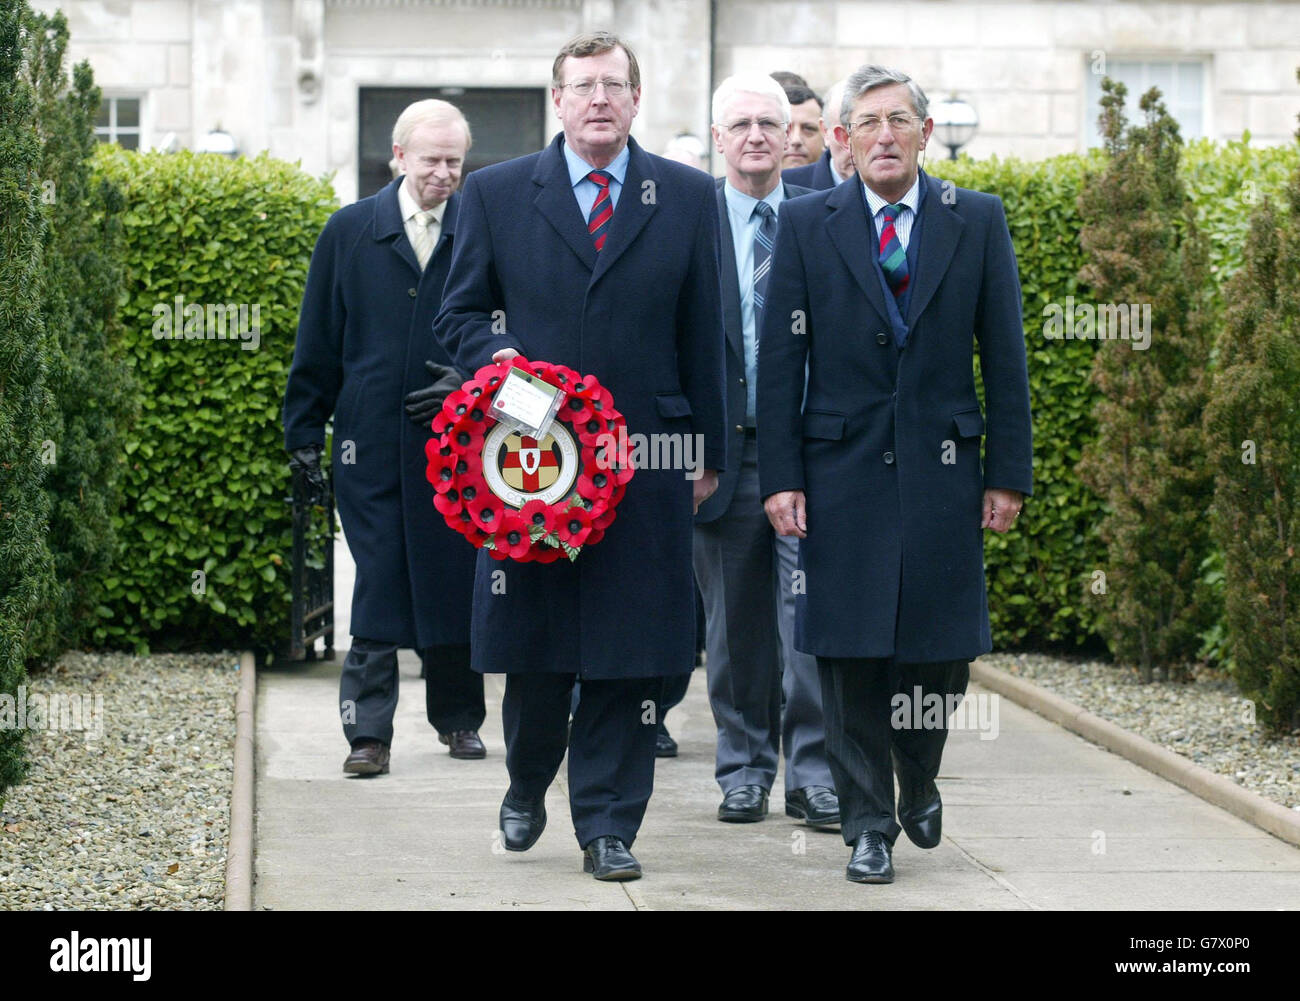 Ulster Unionist Leader David Trimble, front left, with Lord Rogan, front right, and party members, as they prepare to lay a wreath at former party leader Lord Carson's Burial ground in the Stormont estate. Stock Photo